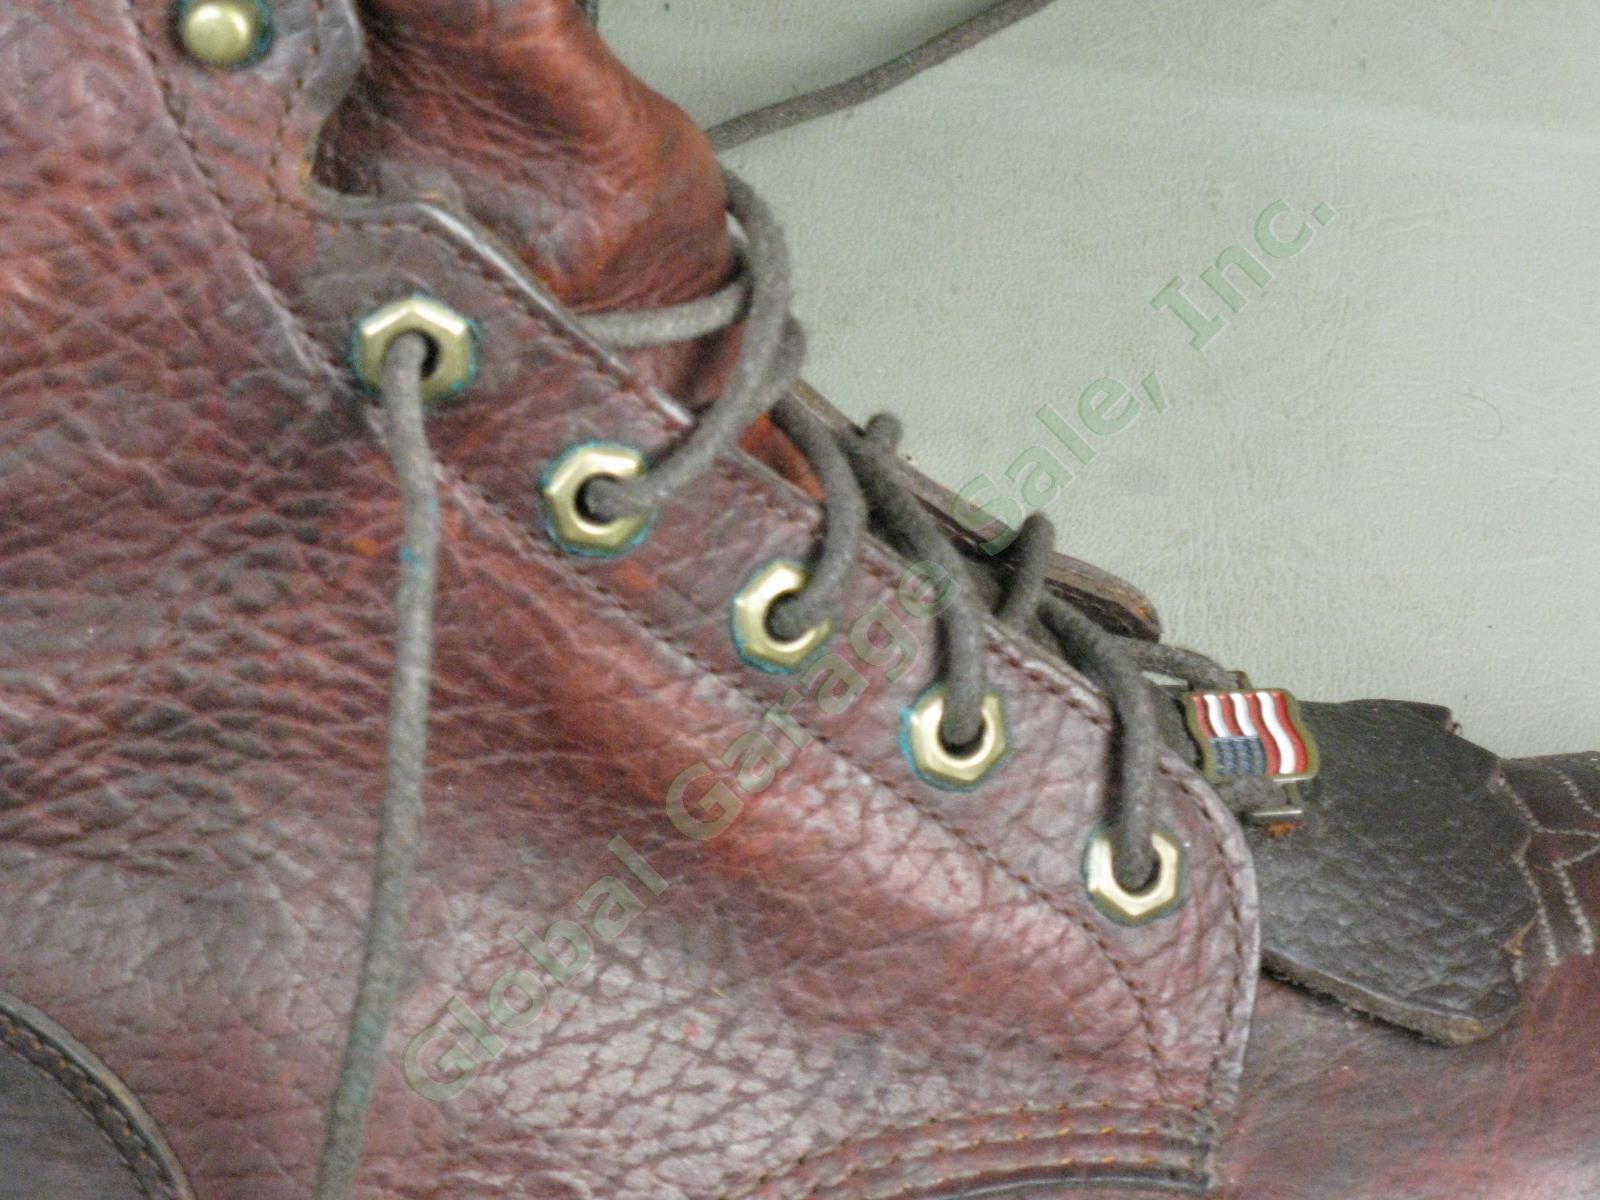 Near Mint! Chippewa Bison Stampede Leather Boots 29553 USA Steel Shank 14-D 11